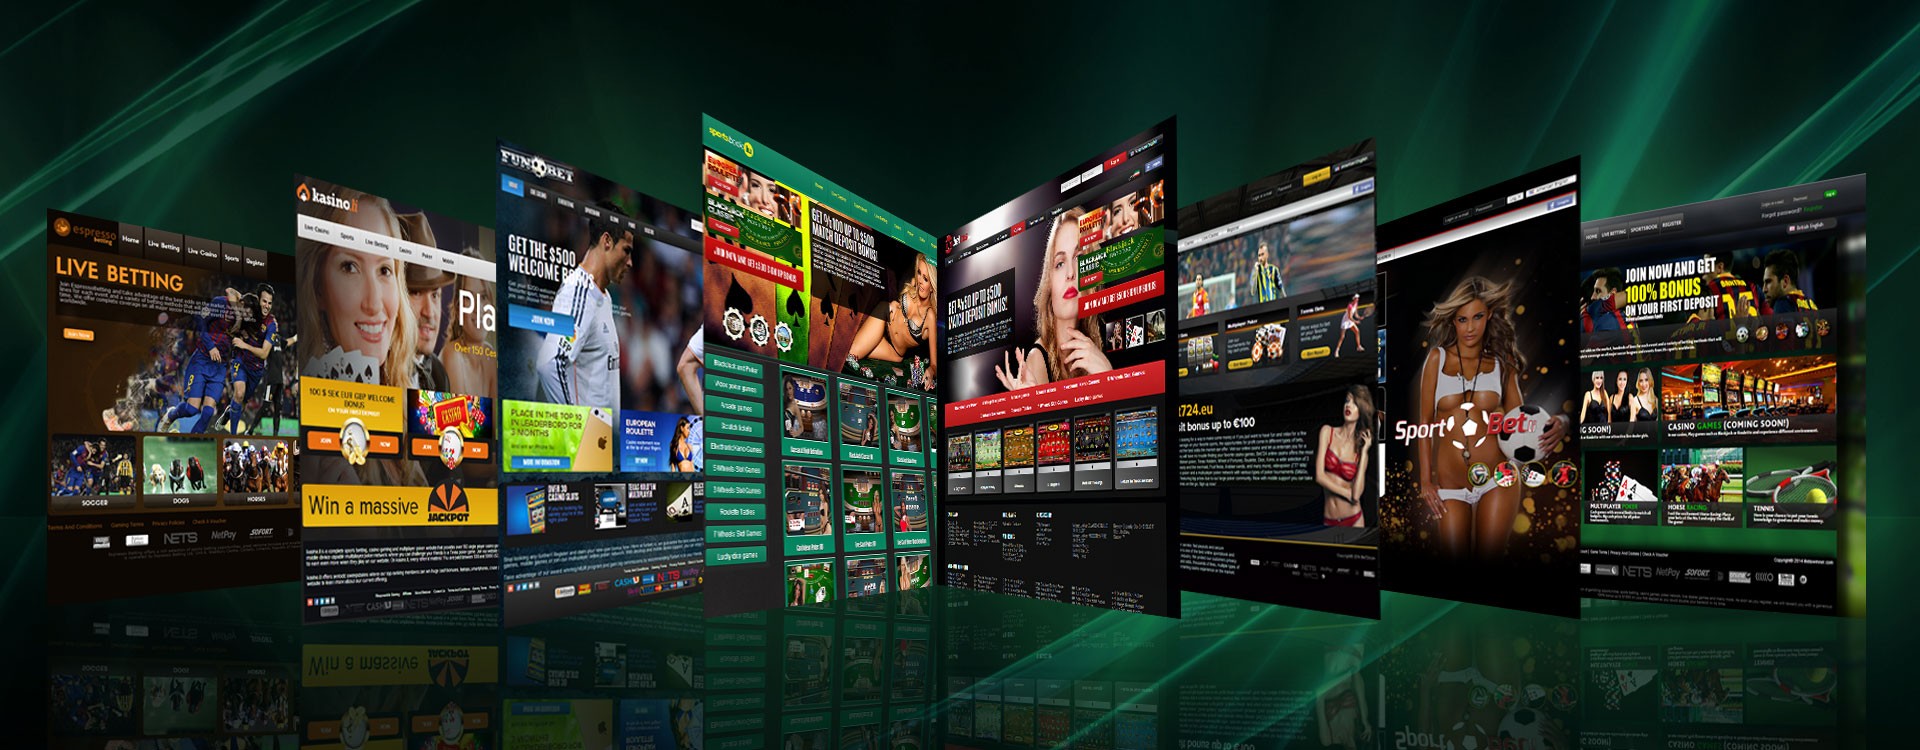 World online gambling Market to develop at CAGR of 9.03%, 2016-2020: Challenges,